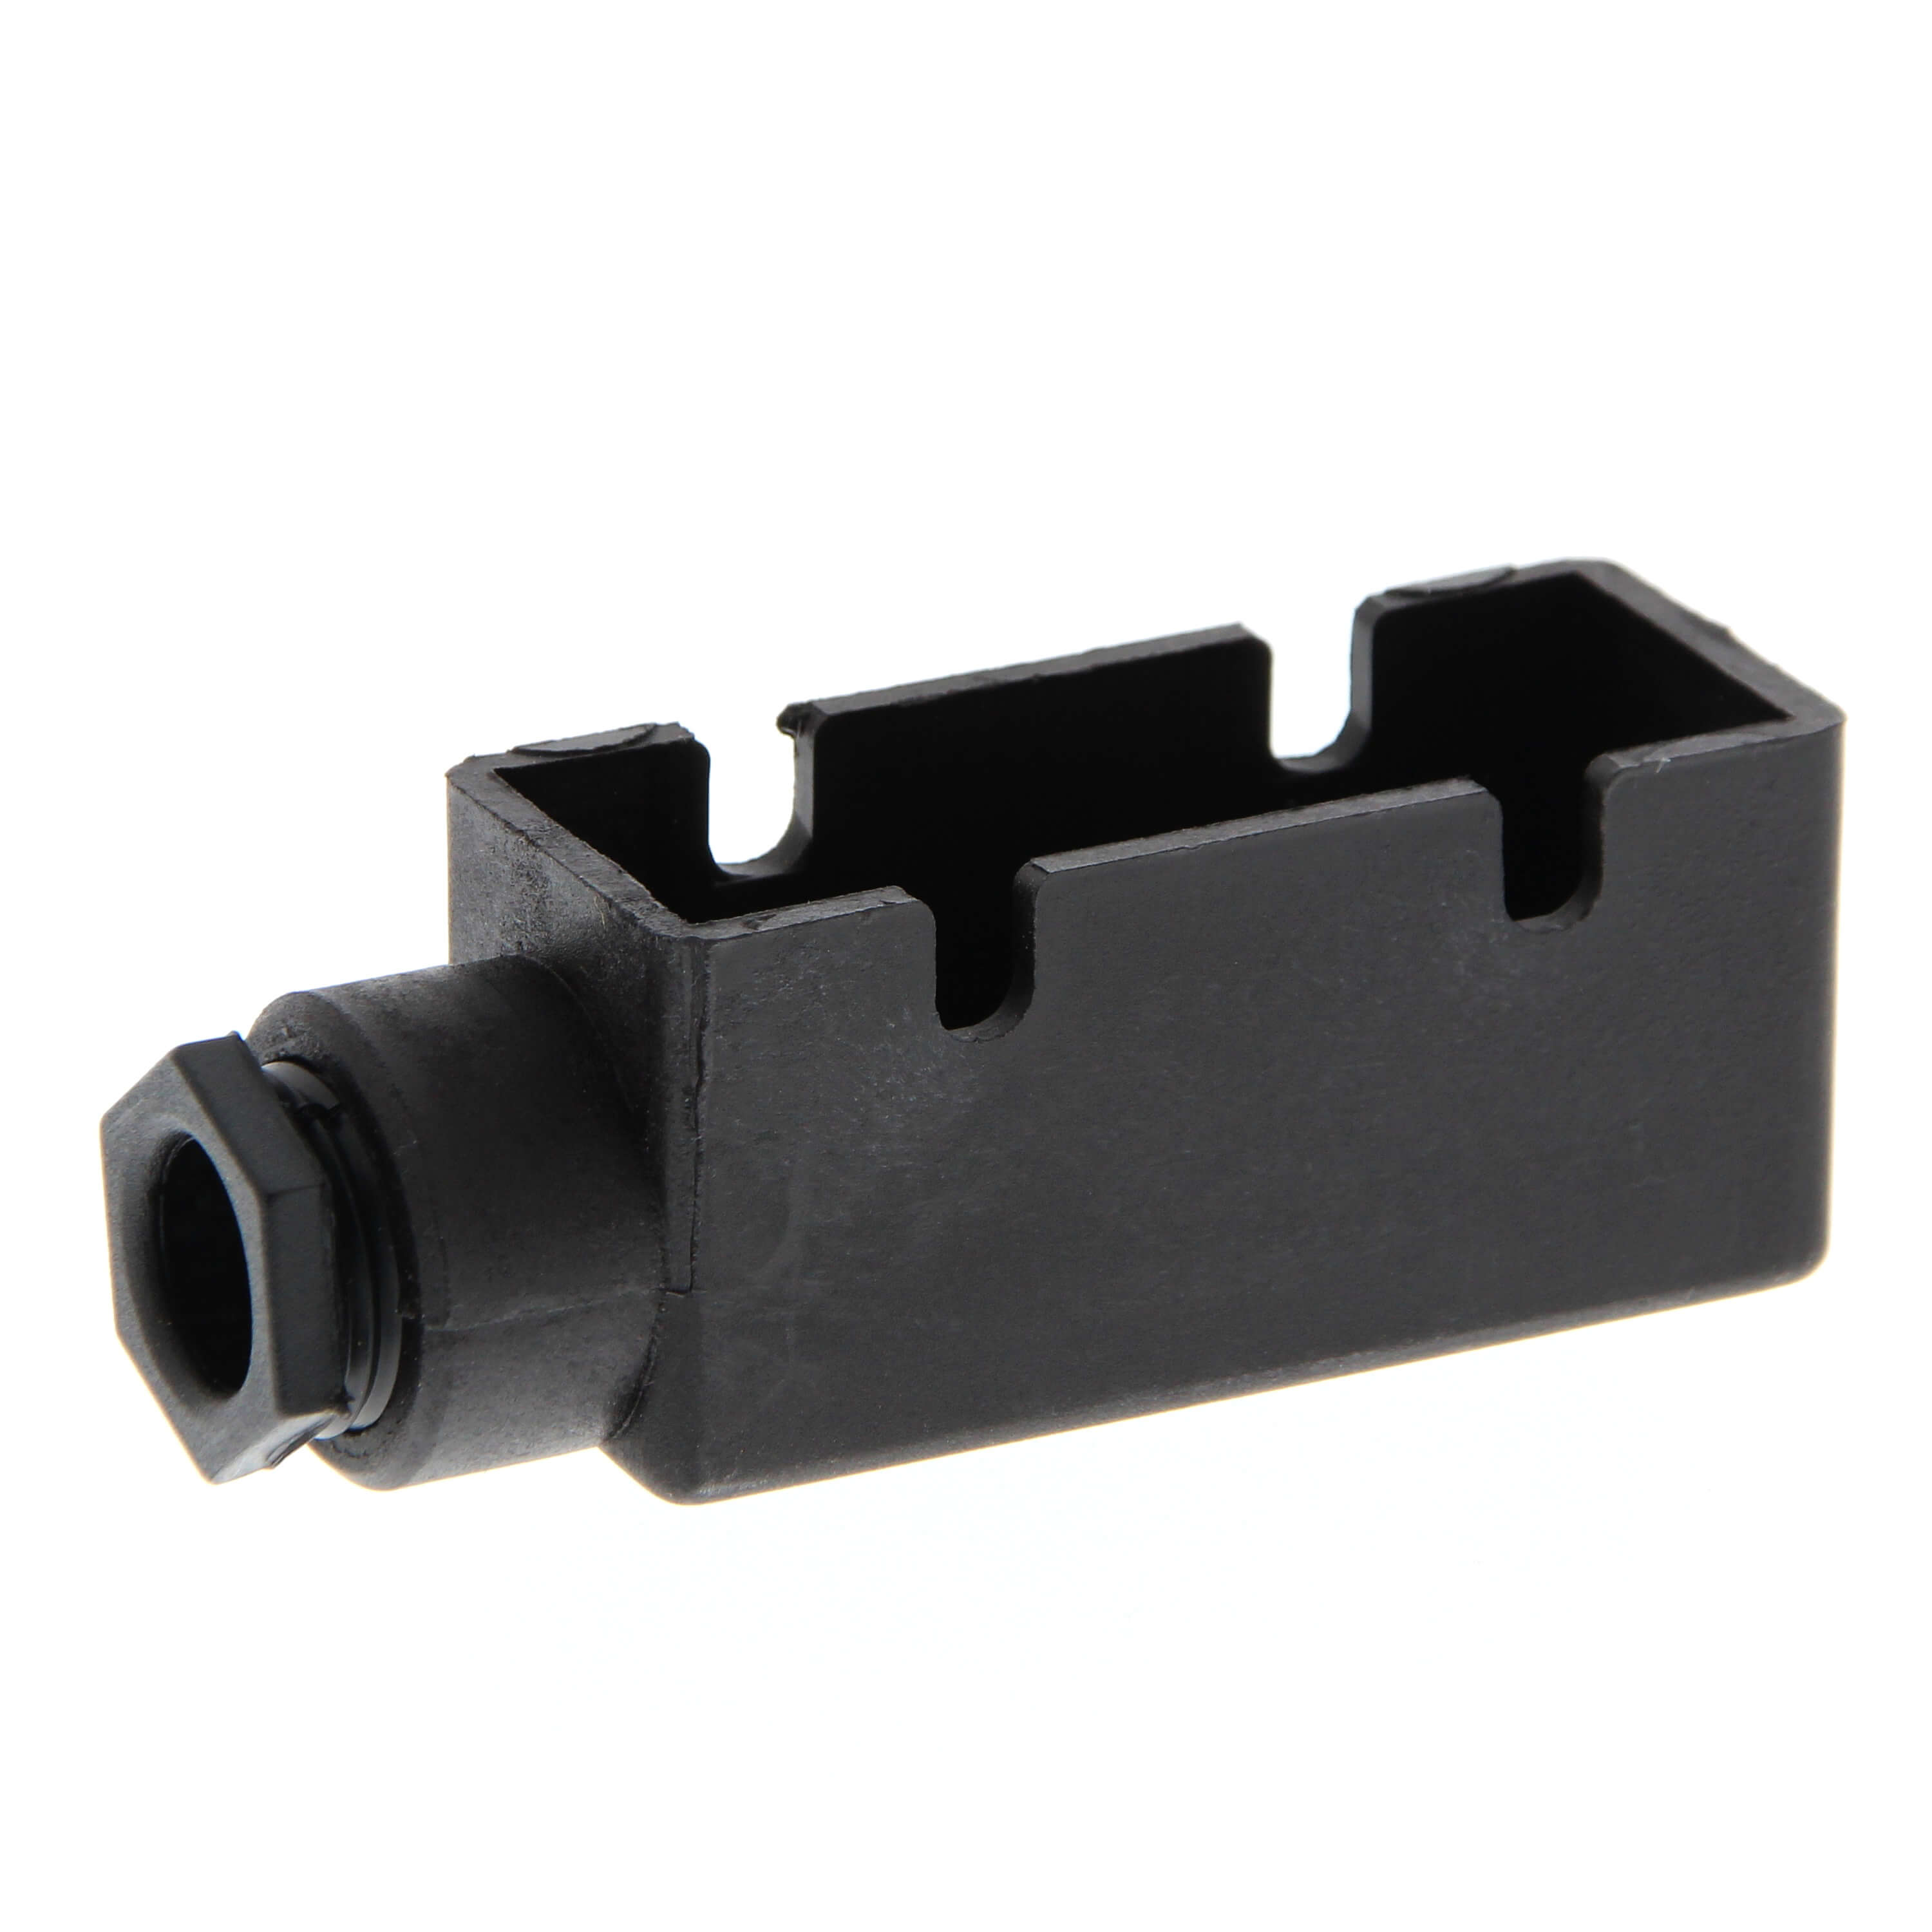 Terminal Cover for General-purpose Basic Switch Z15